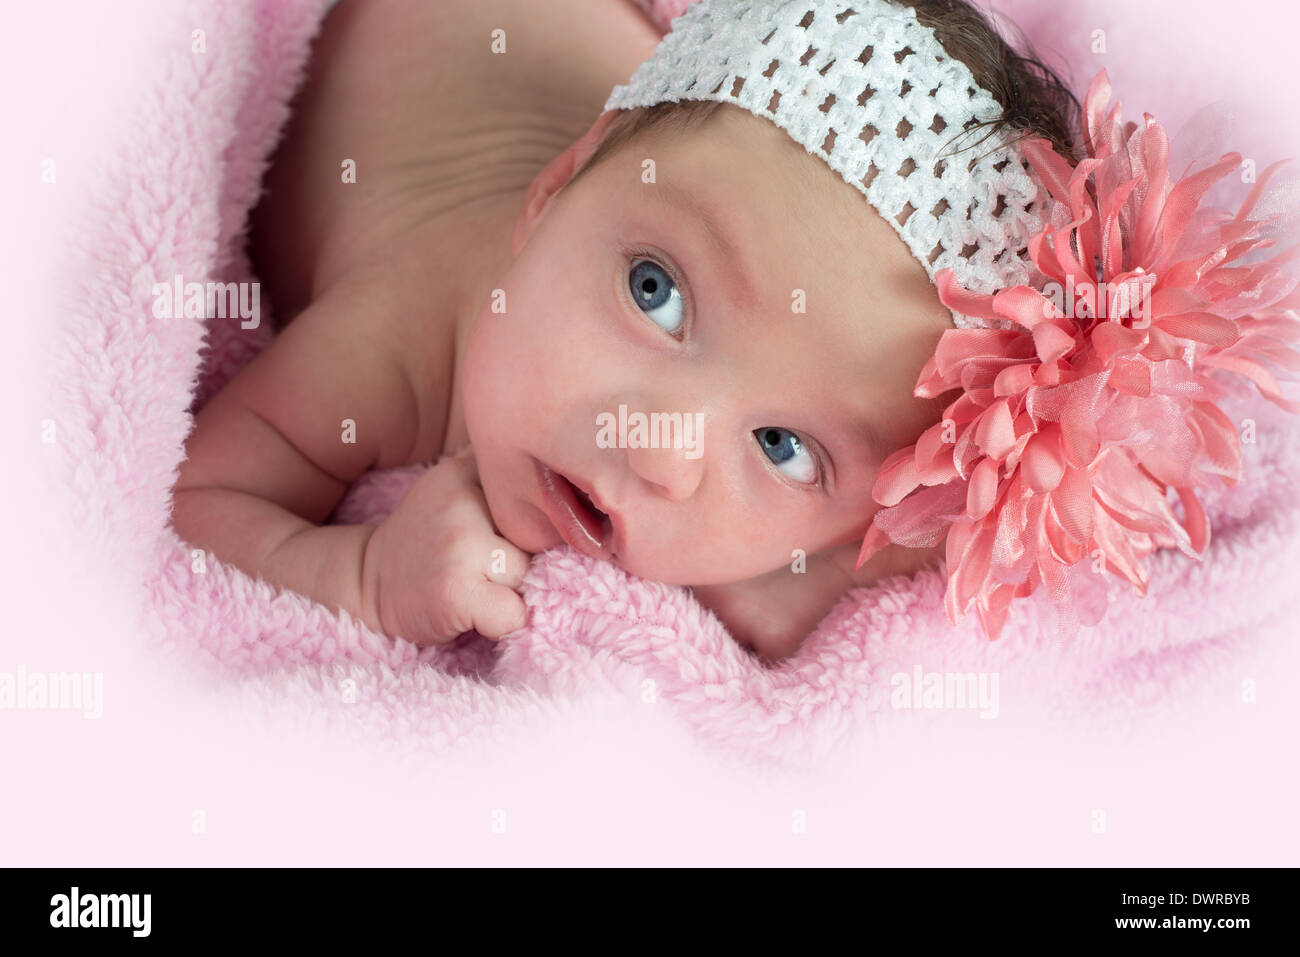 pretty blue eyed baby wearing a flower headband laying on a pink blanket looking up Stock Photo